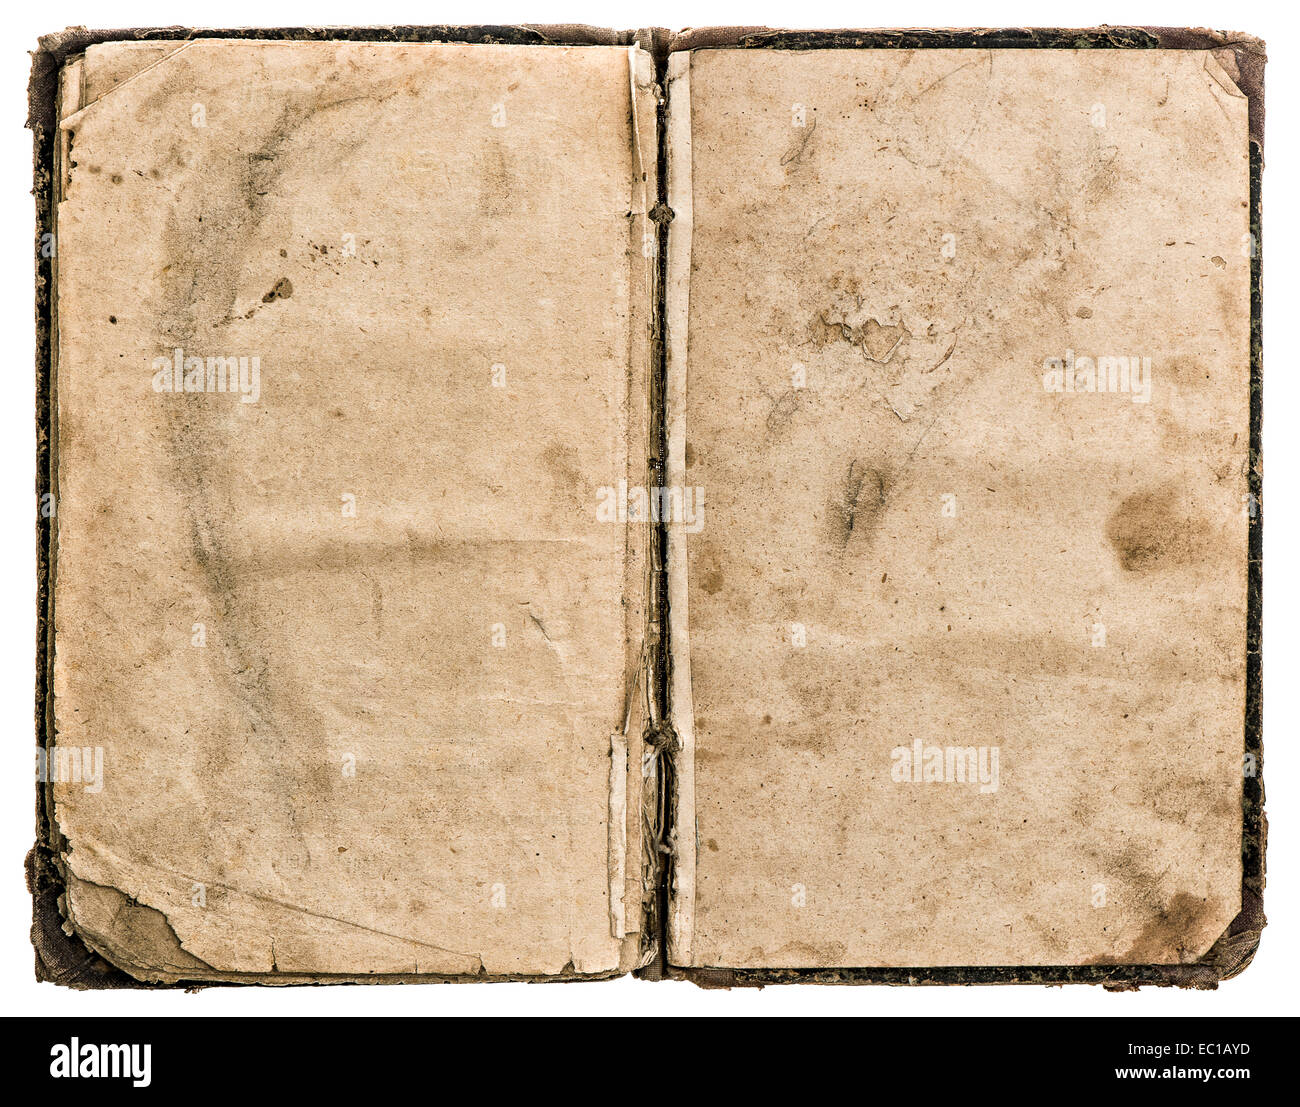 open old book isolated on white background. grungy worn paper texture Stock Photo